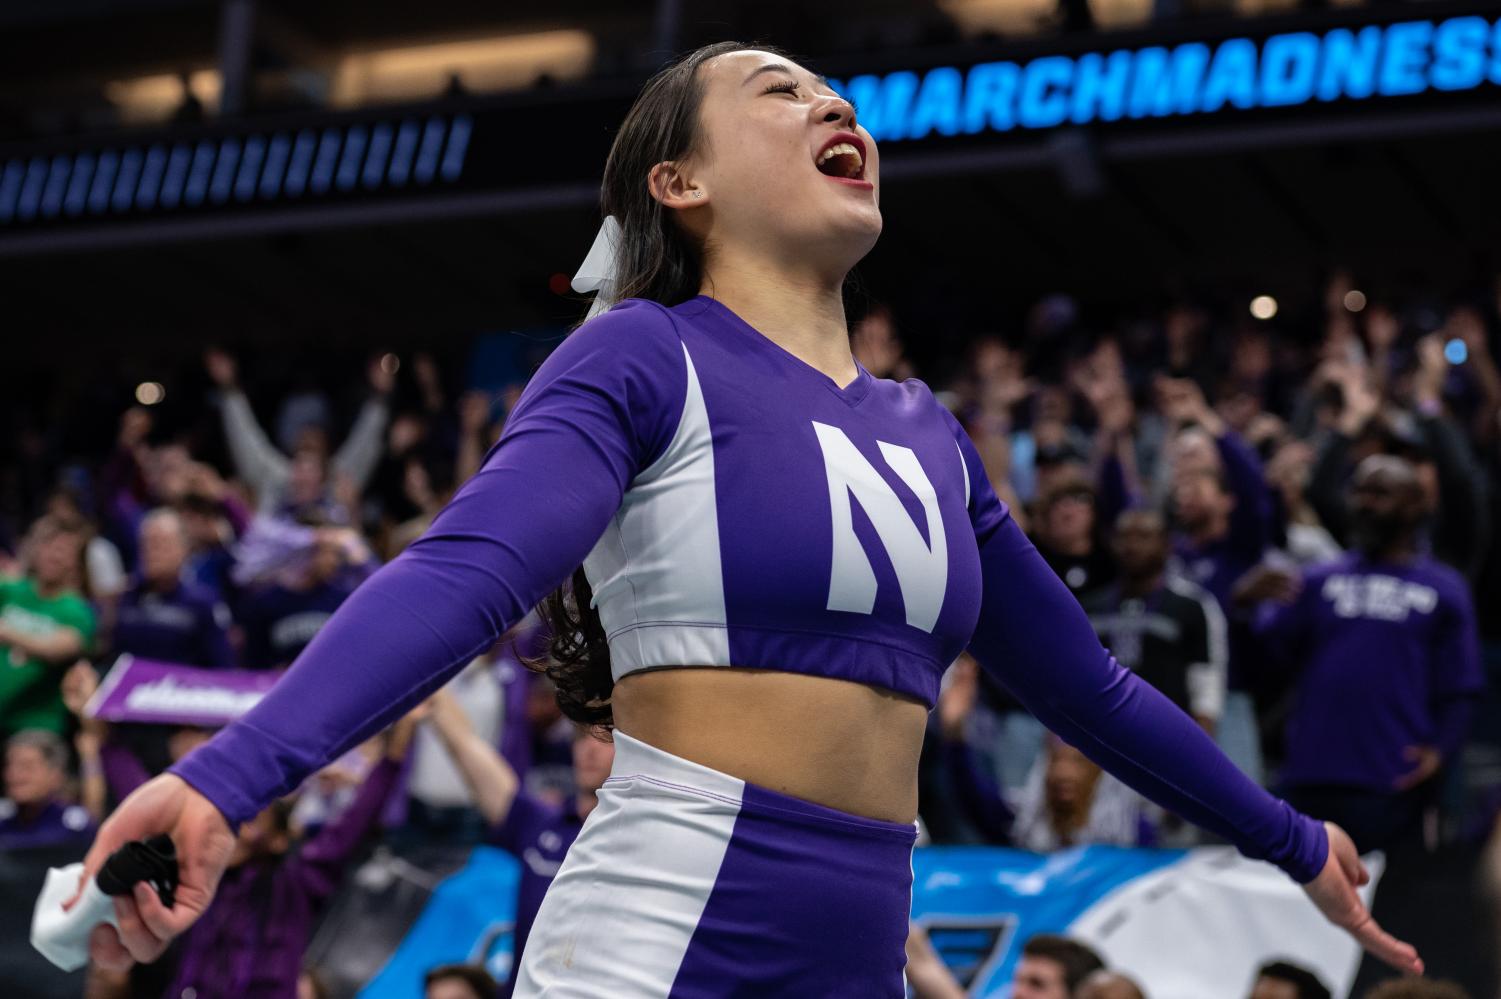 A cheerleader in purple and white spreads their arms and looks toward the crowd.